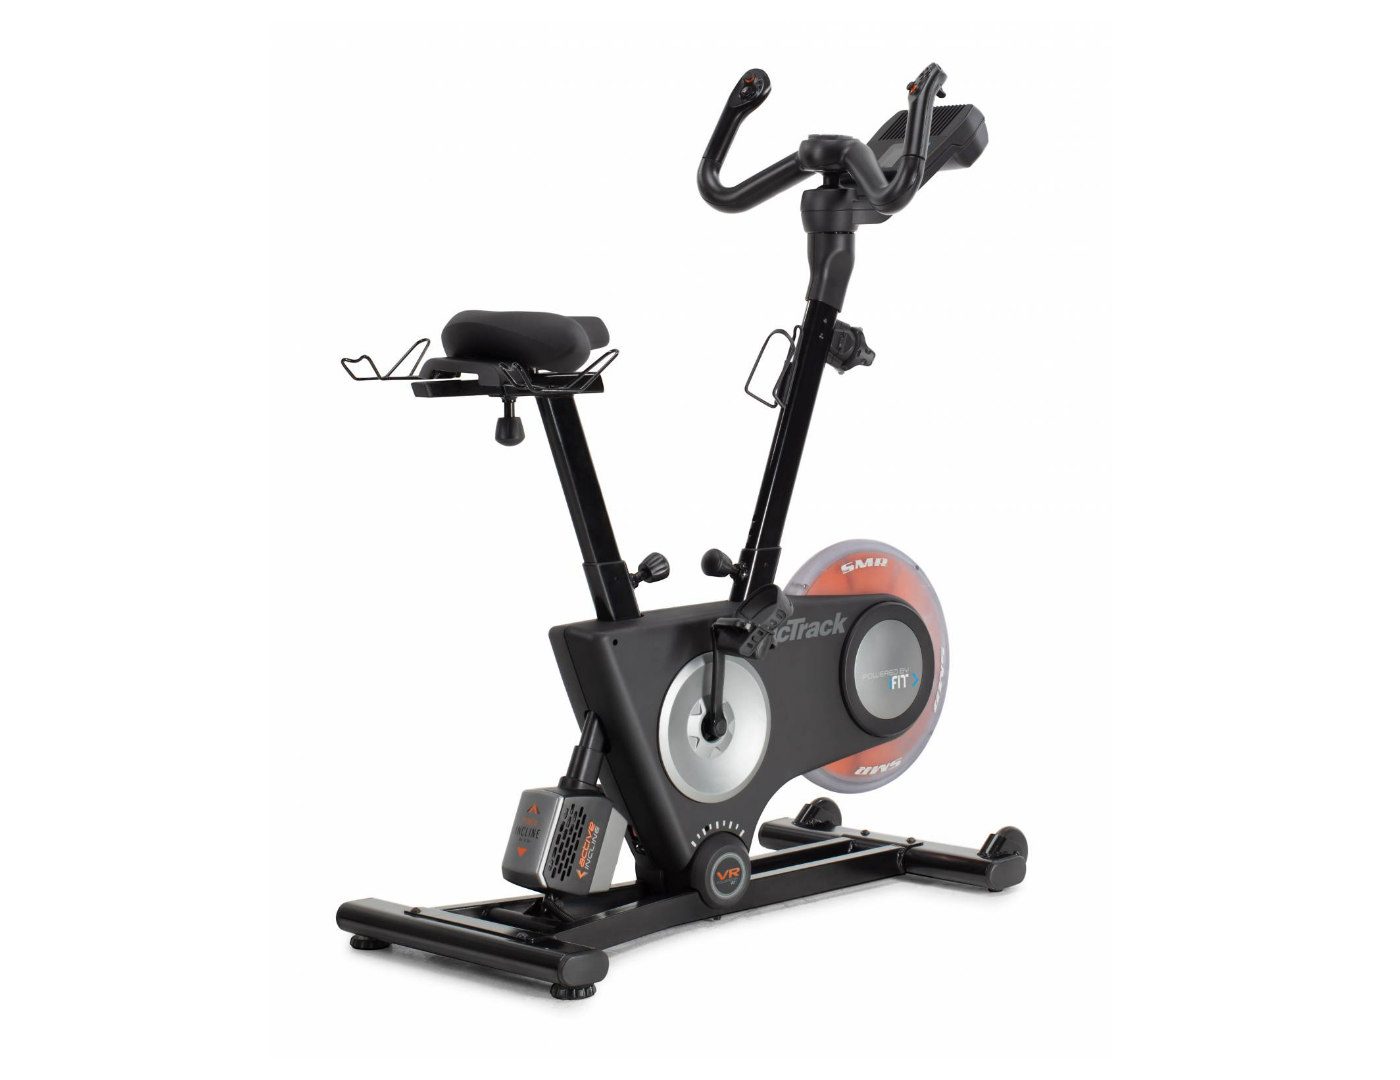 lean cycle trainer exercise bike